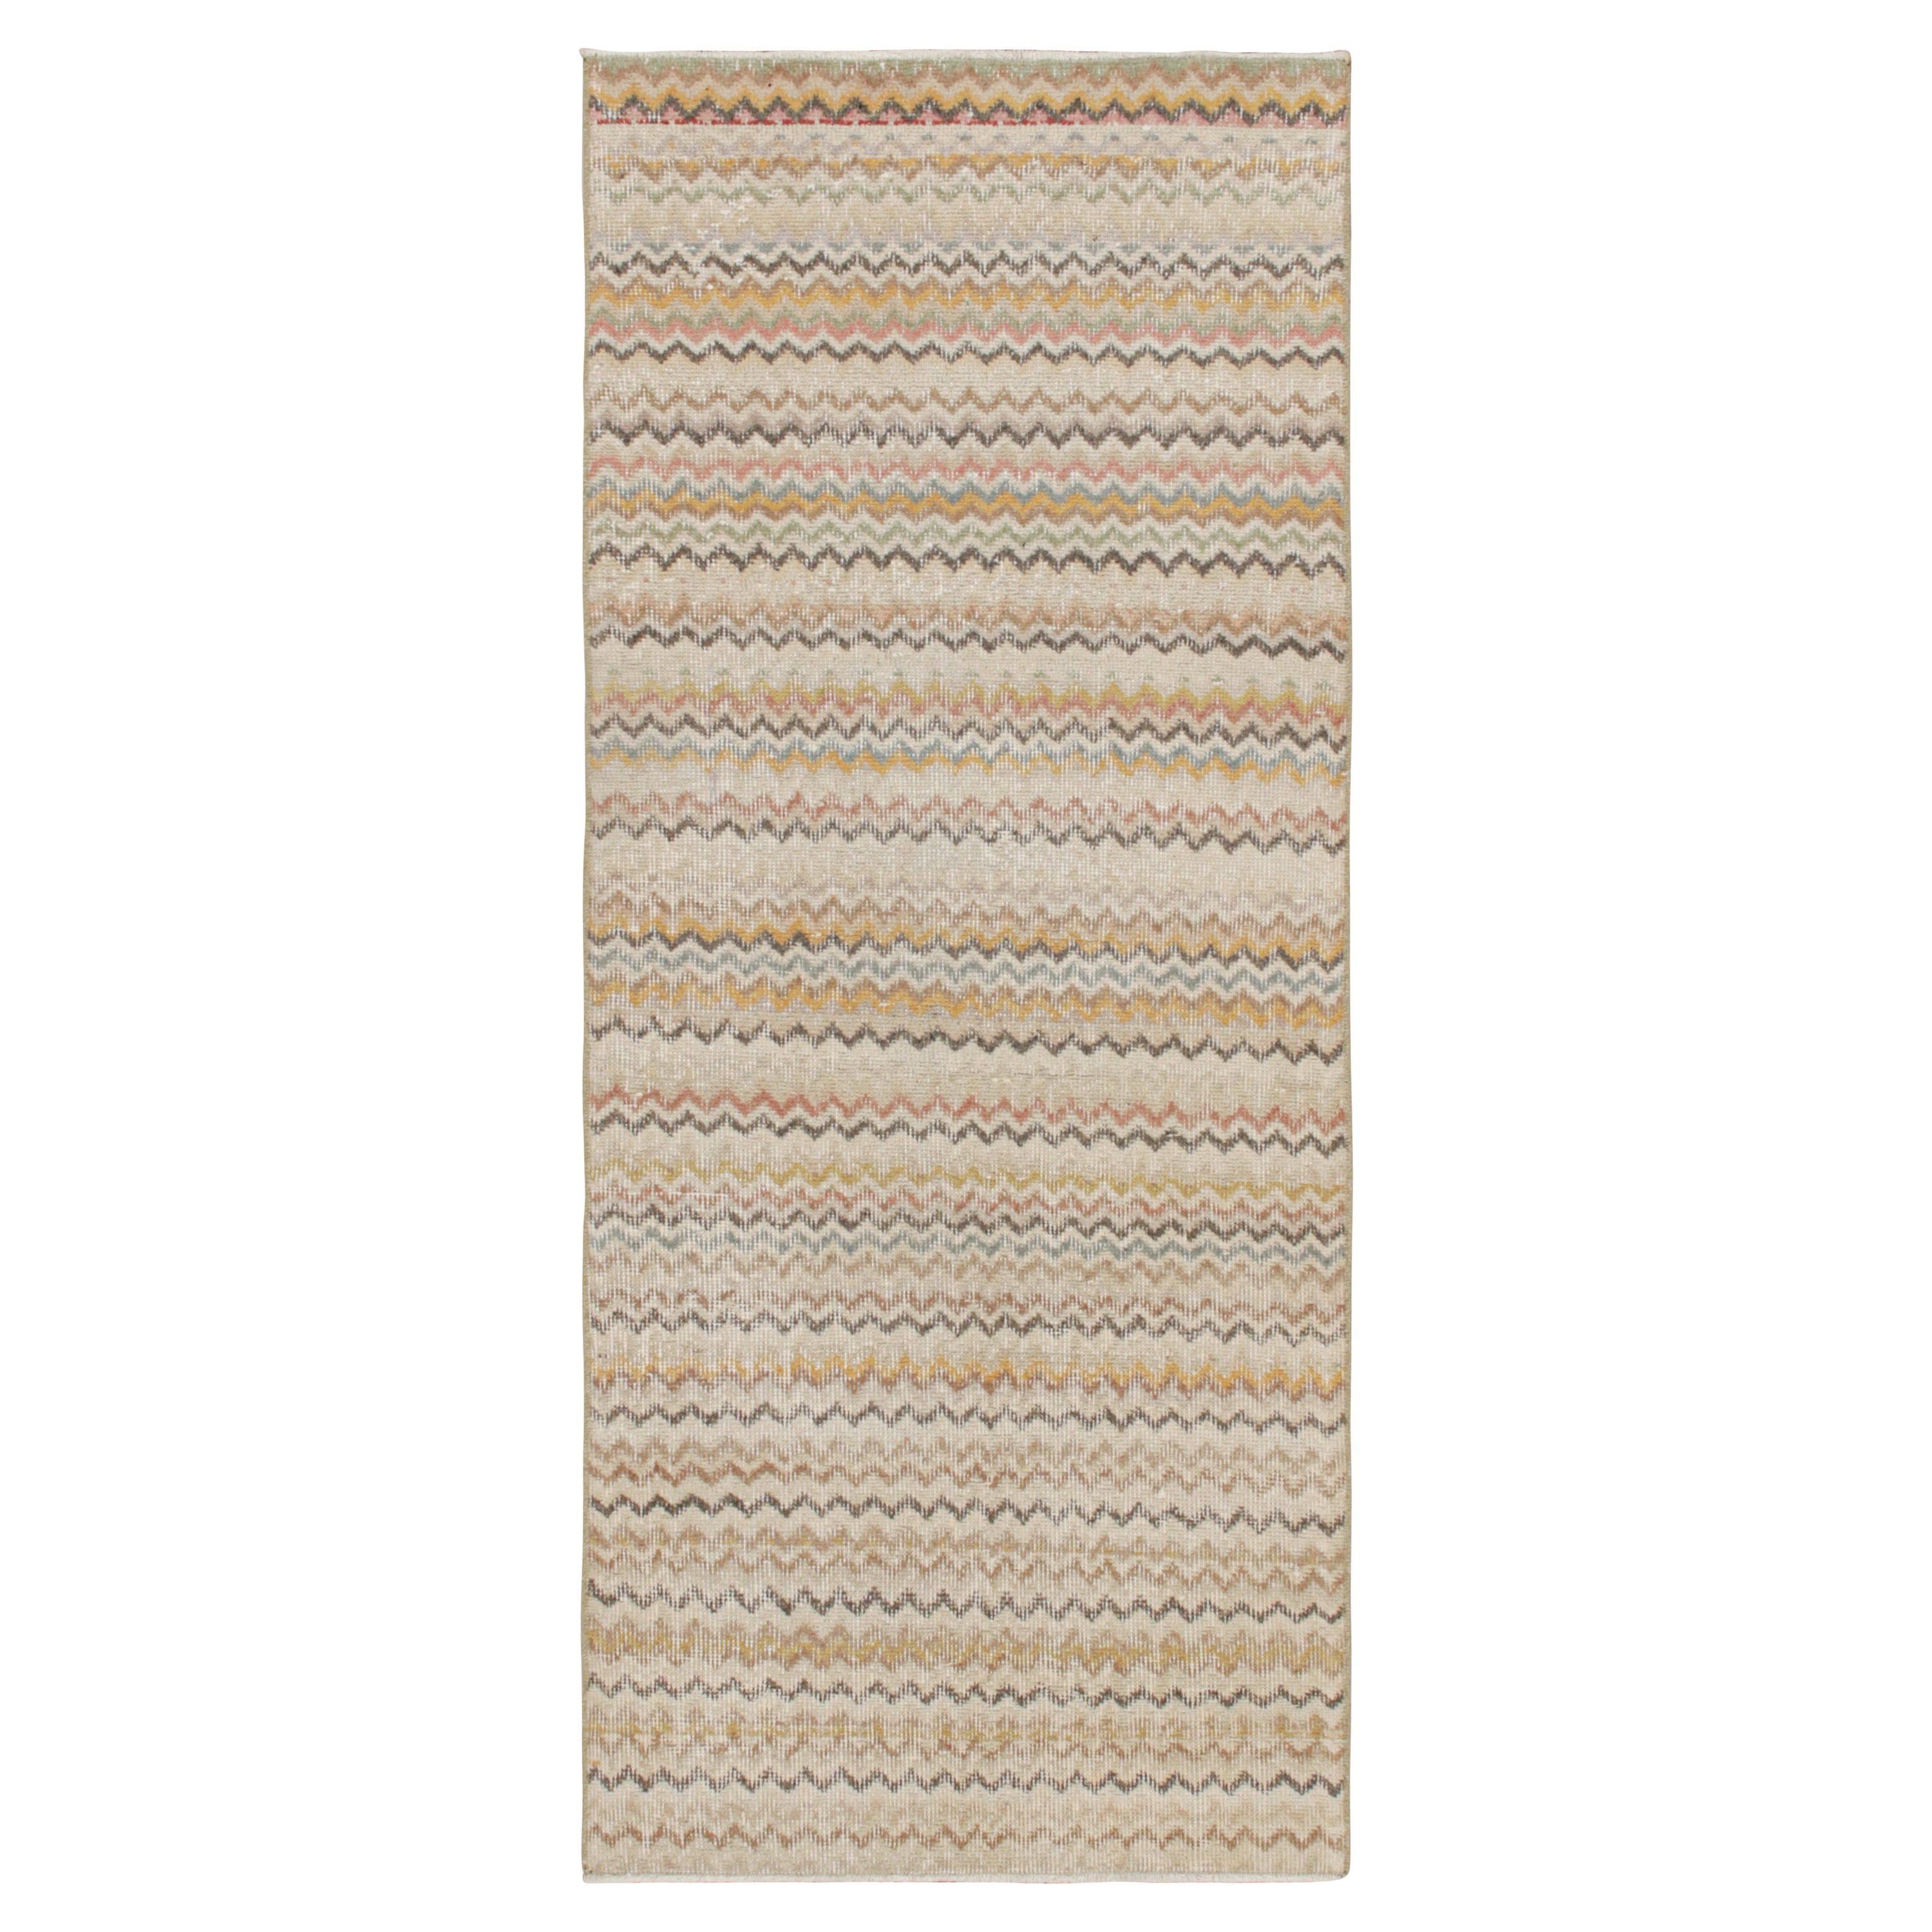 Vintage Zeki Müren Runner in Taupe with Polychromatic Chevrons by Rug & Kilim For Sale